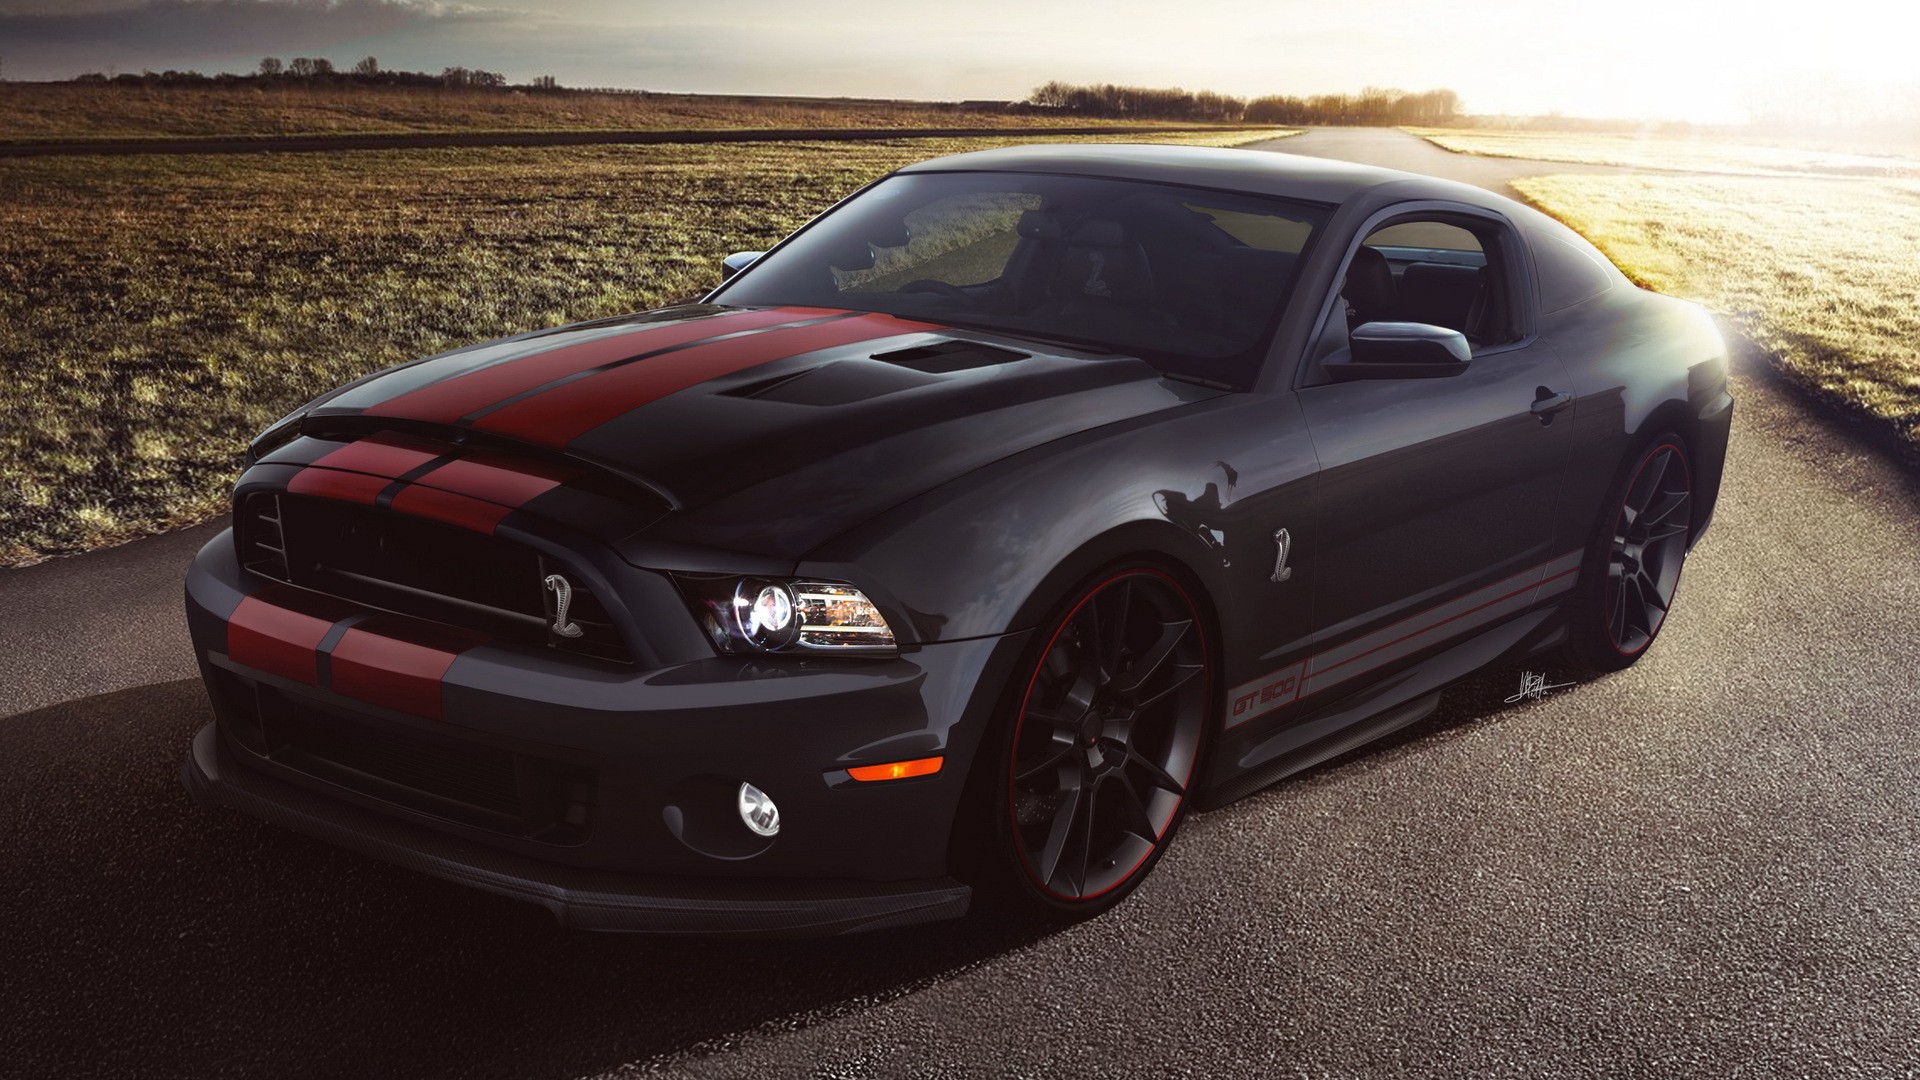   Roads Black Cars Ford Mustang Shelby Gt500 Fresh New Hd Wallpaper 1920x1080